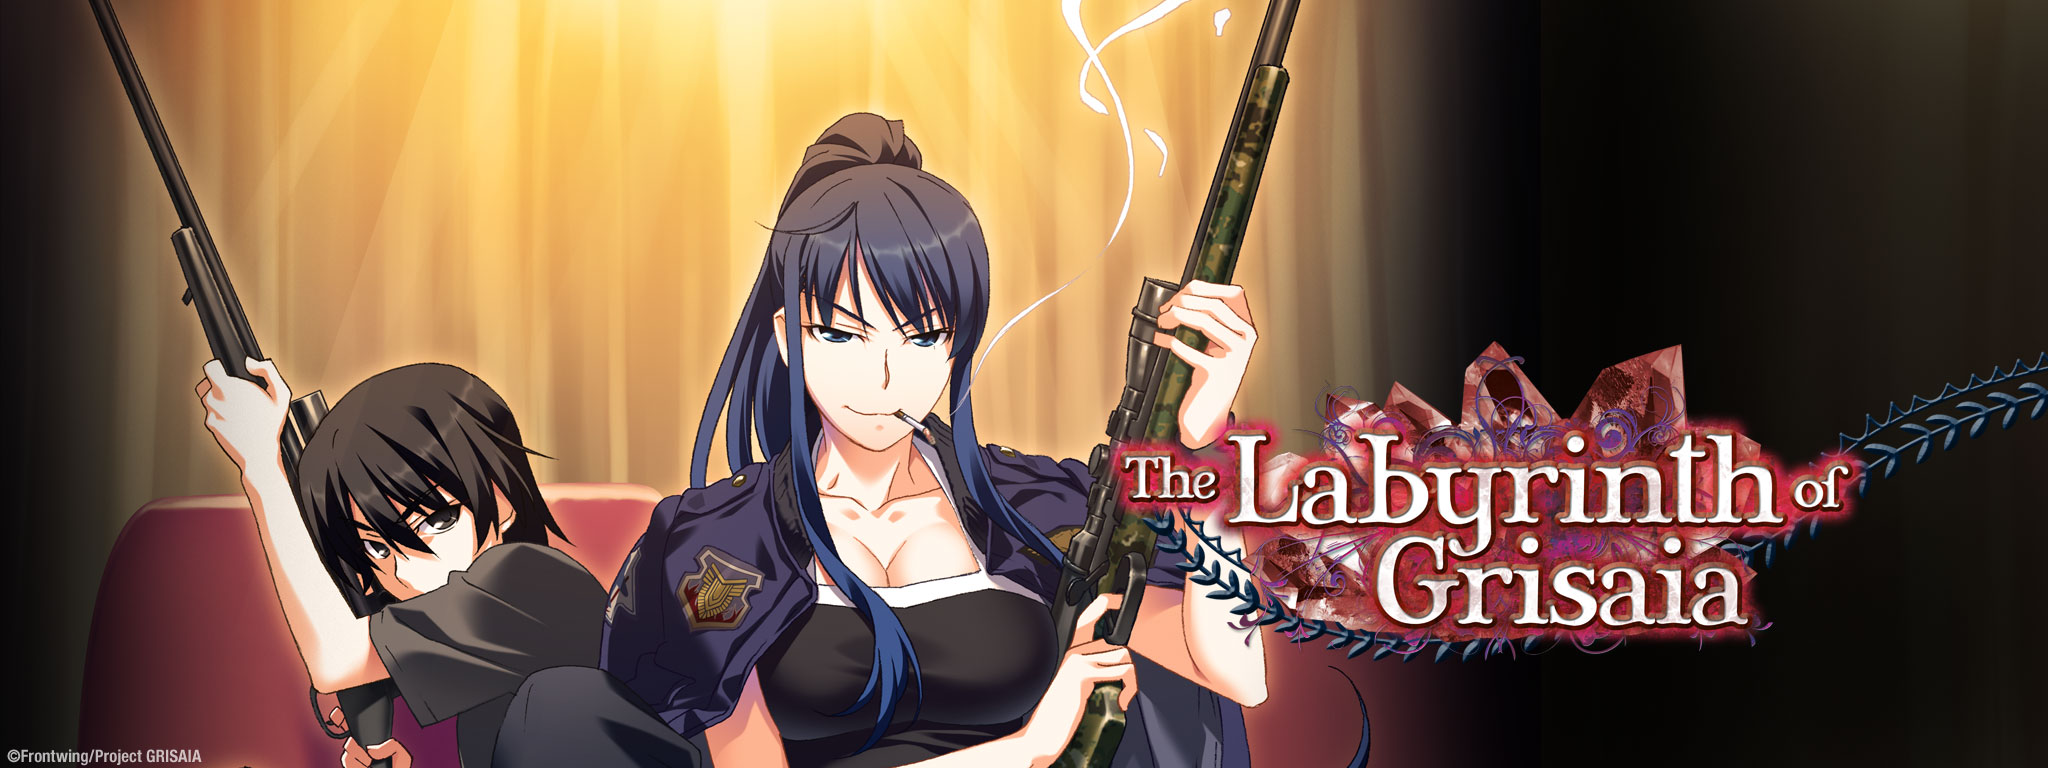 The Labyrinth of Grisaia. 